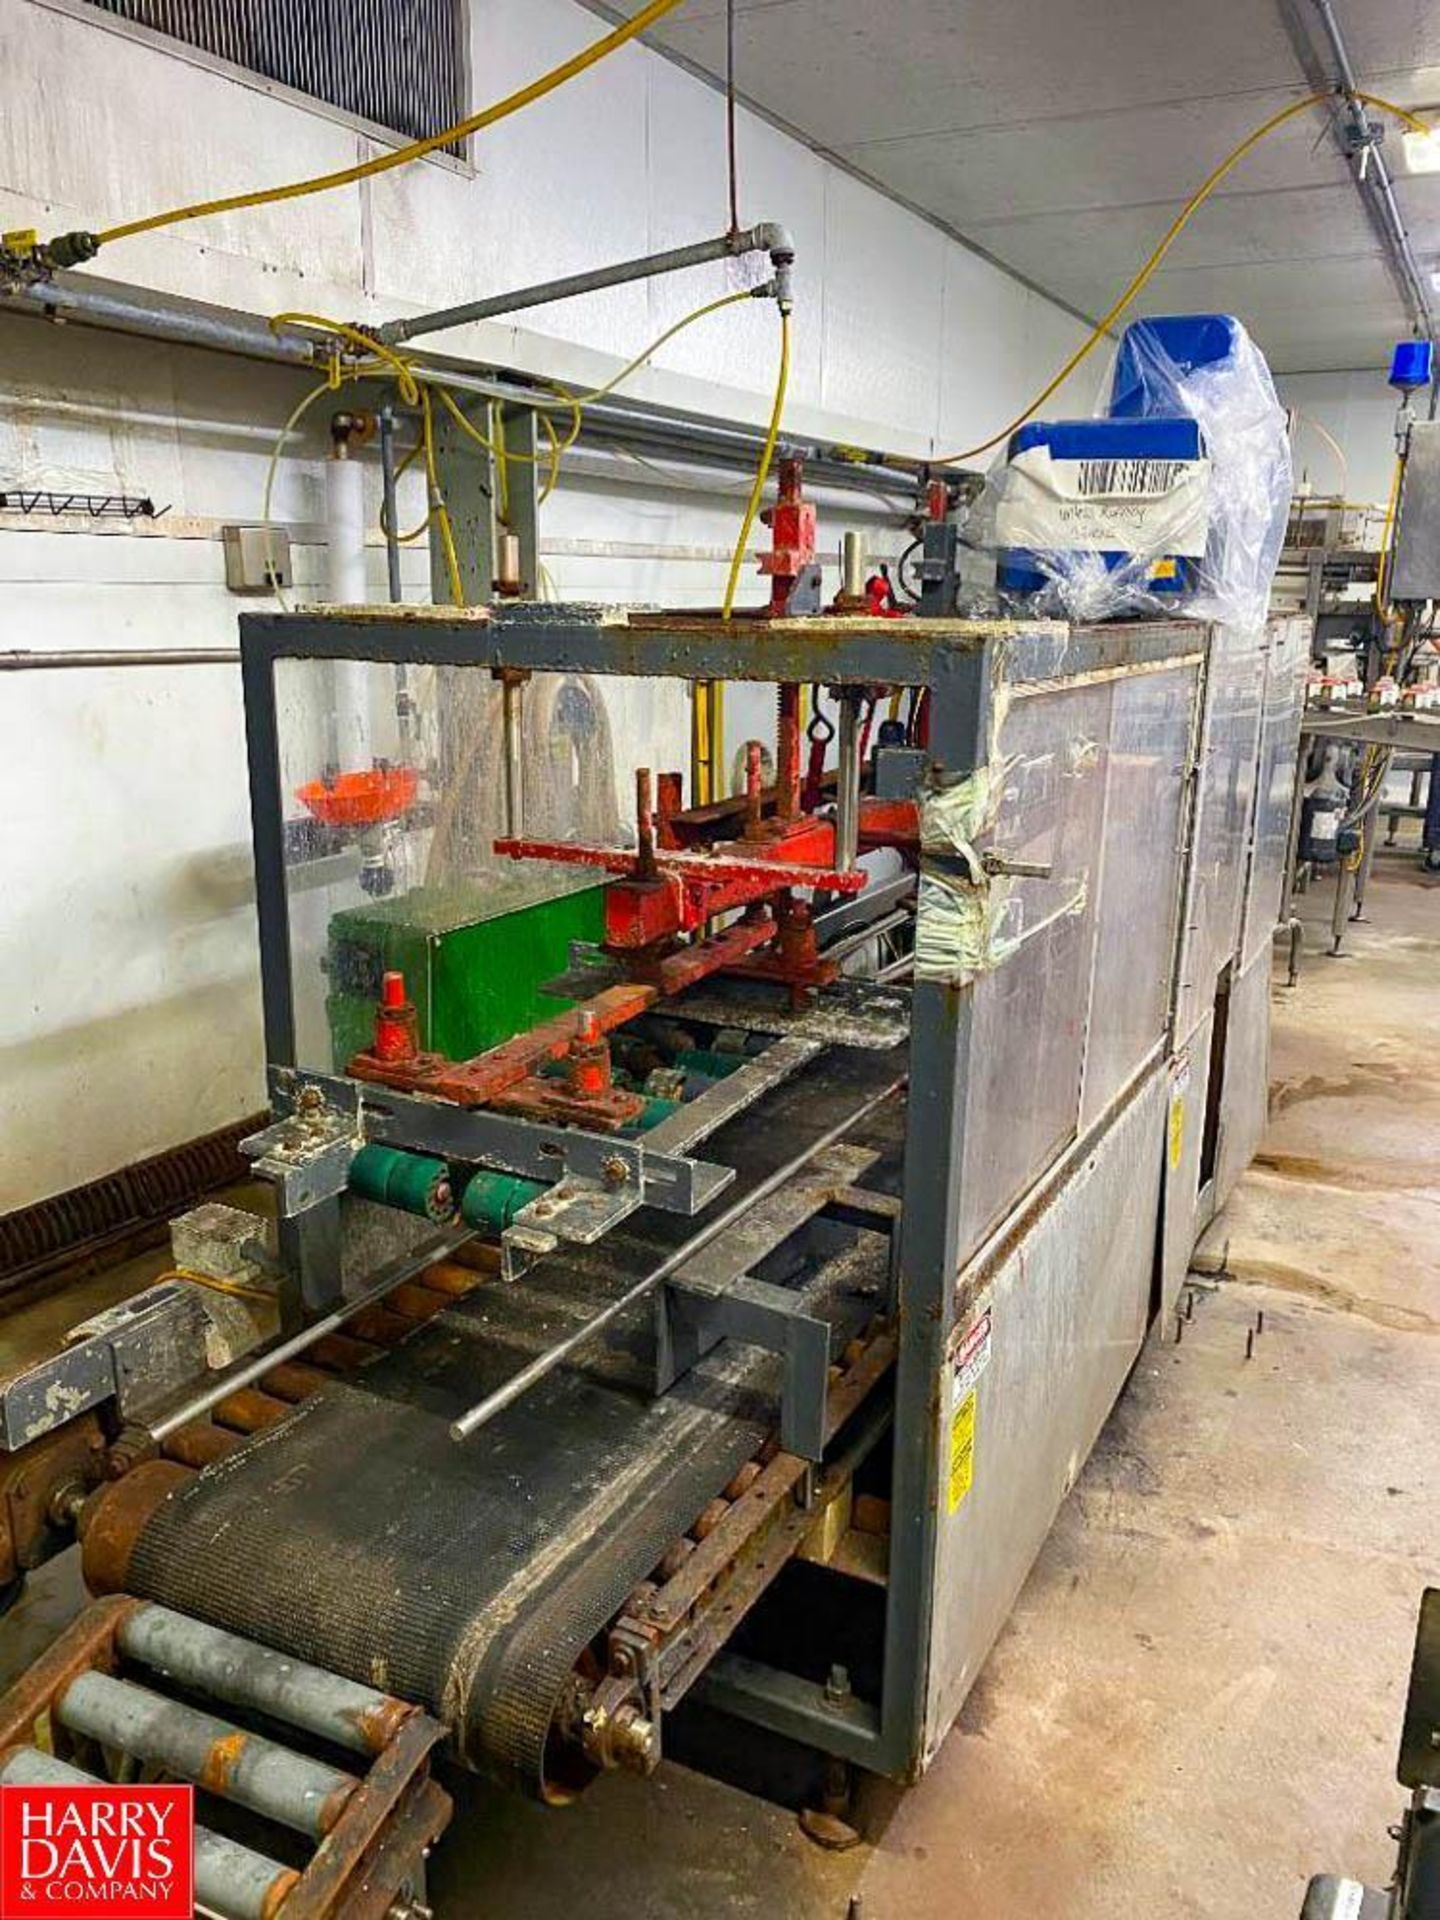 Top Case Sealer with Valco Melton Glue Machine Southern Packaging - Rigging Fee: $850